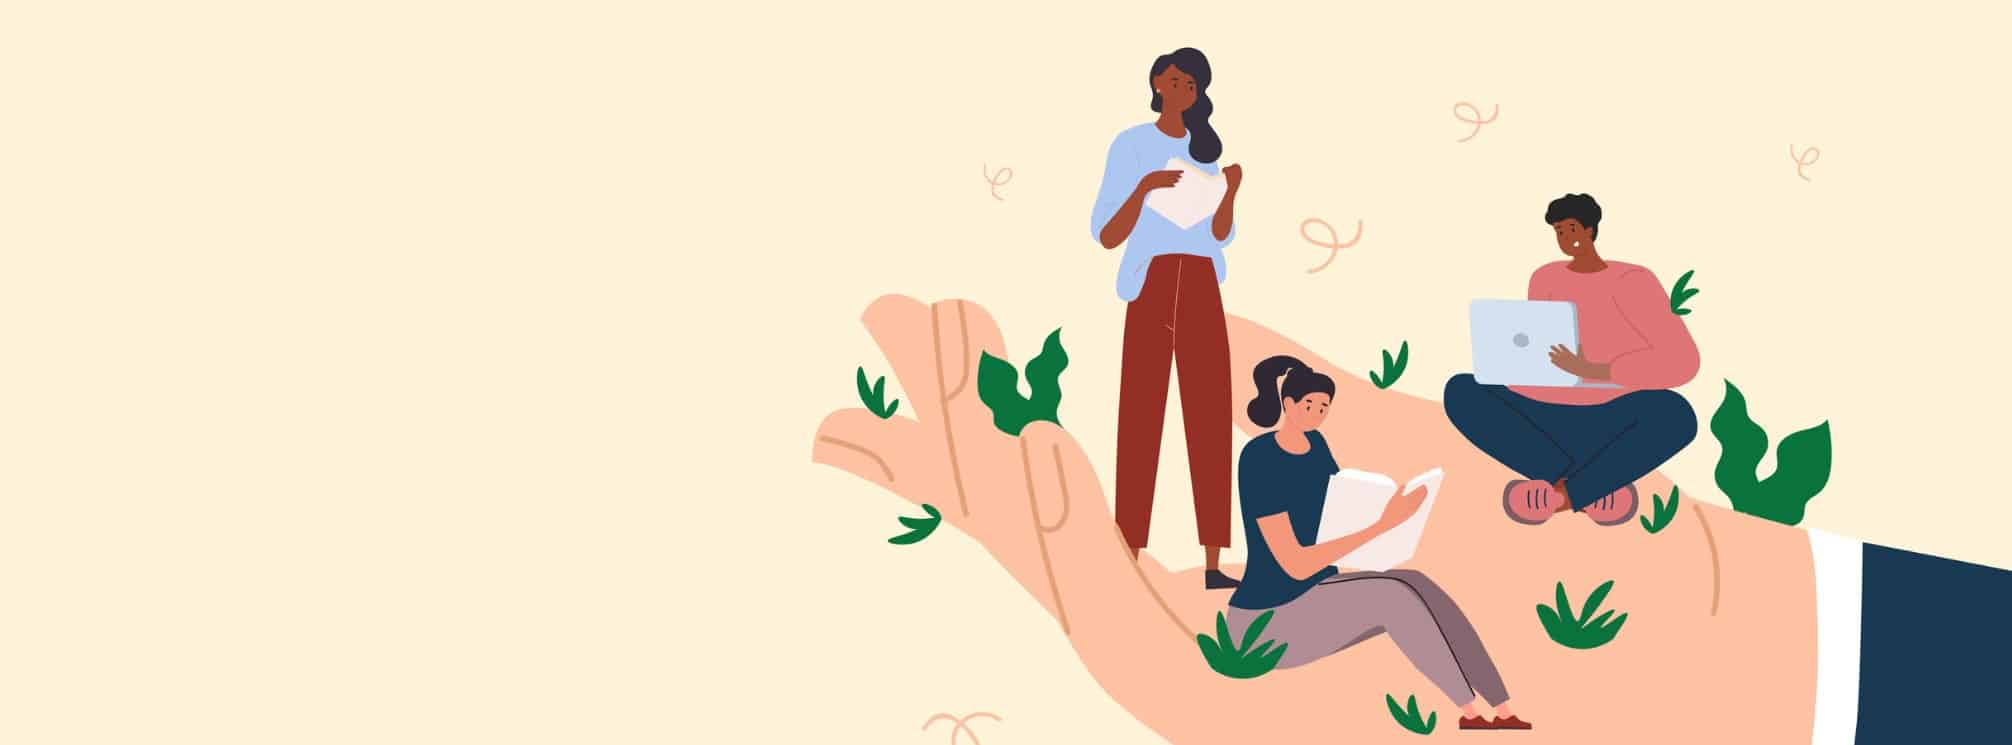 flat art illustration of a hand holding up three employees working in diverse ways